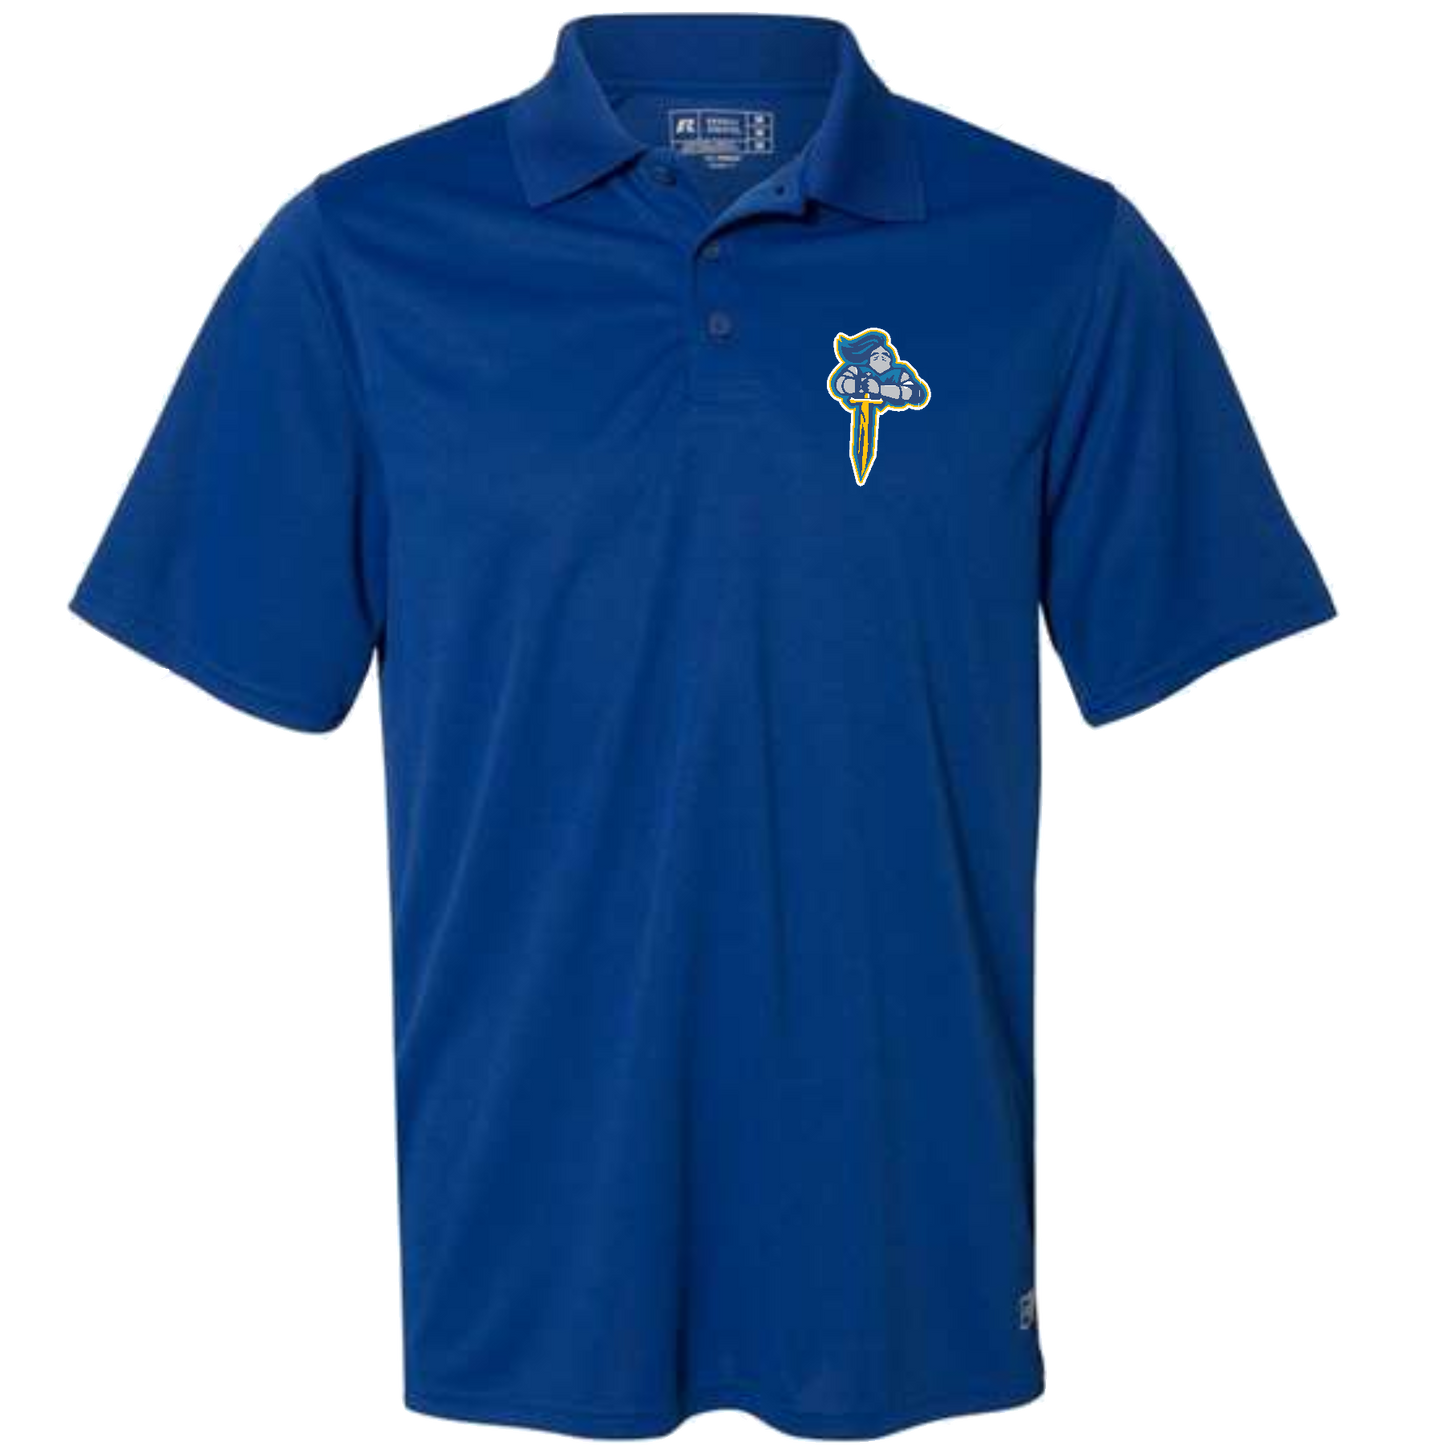 Russell Athletic - Essential Short Sleeve Polo